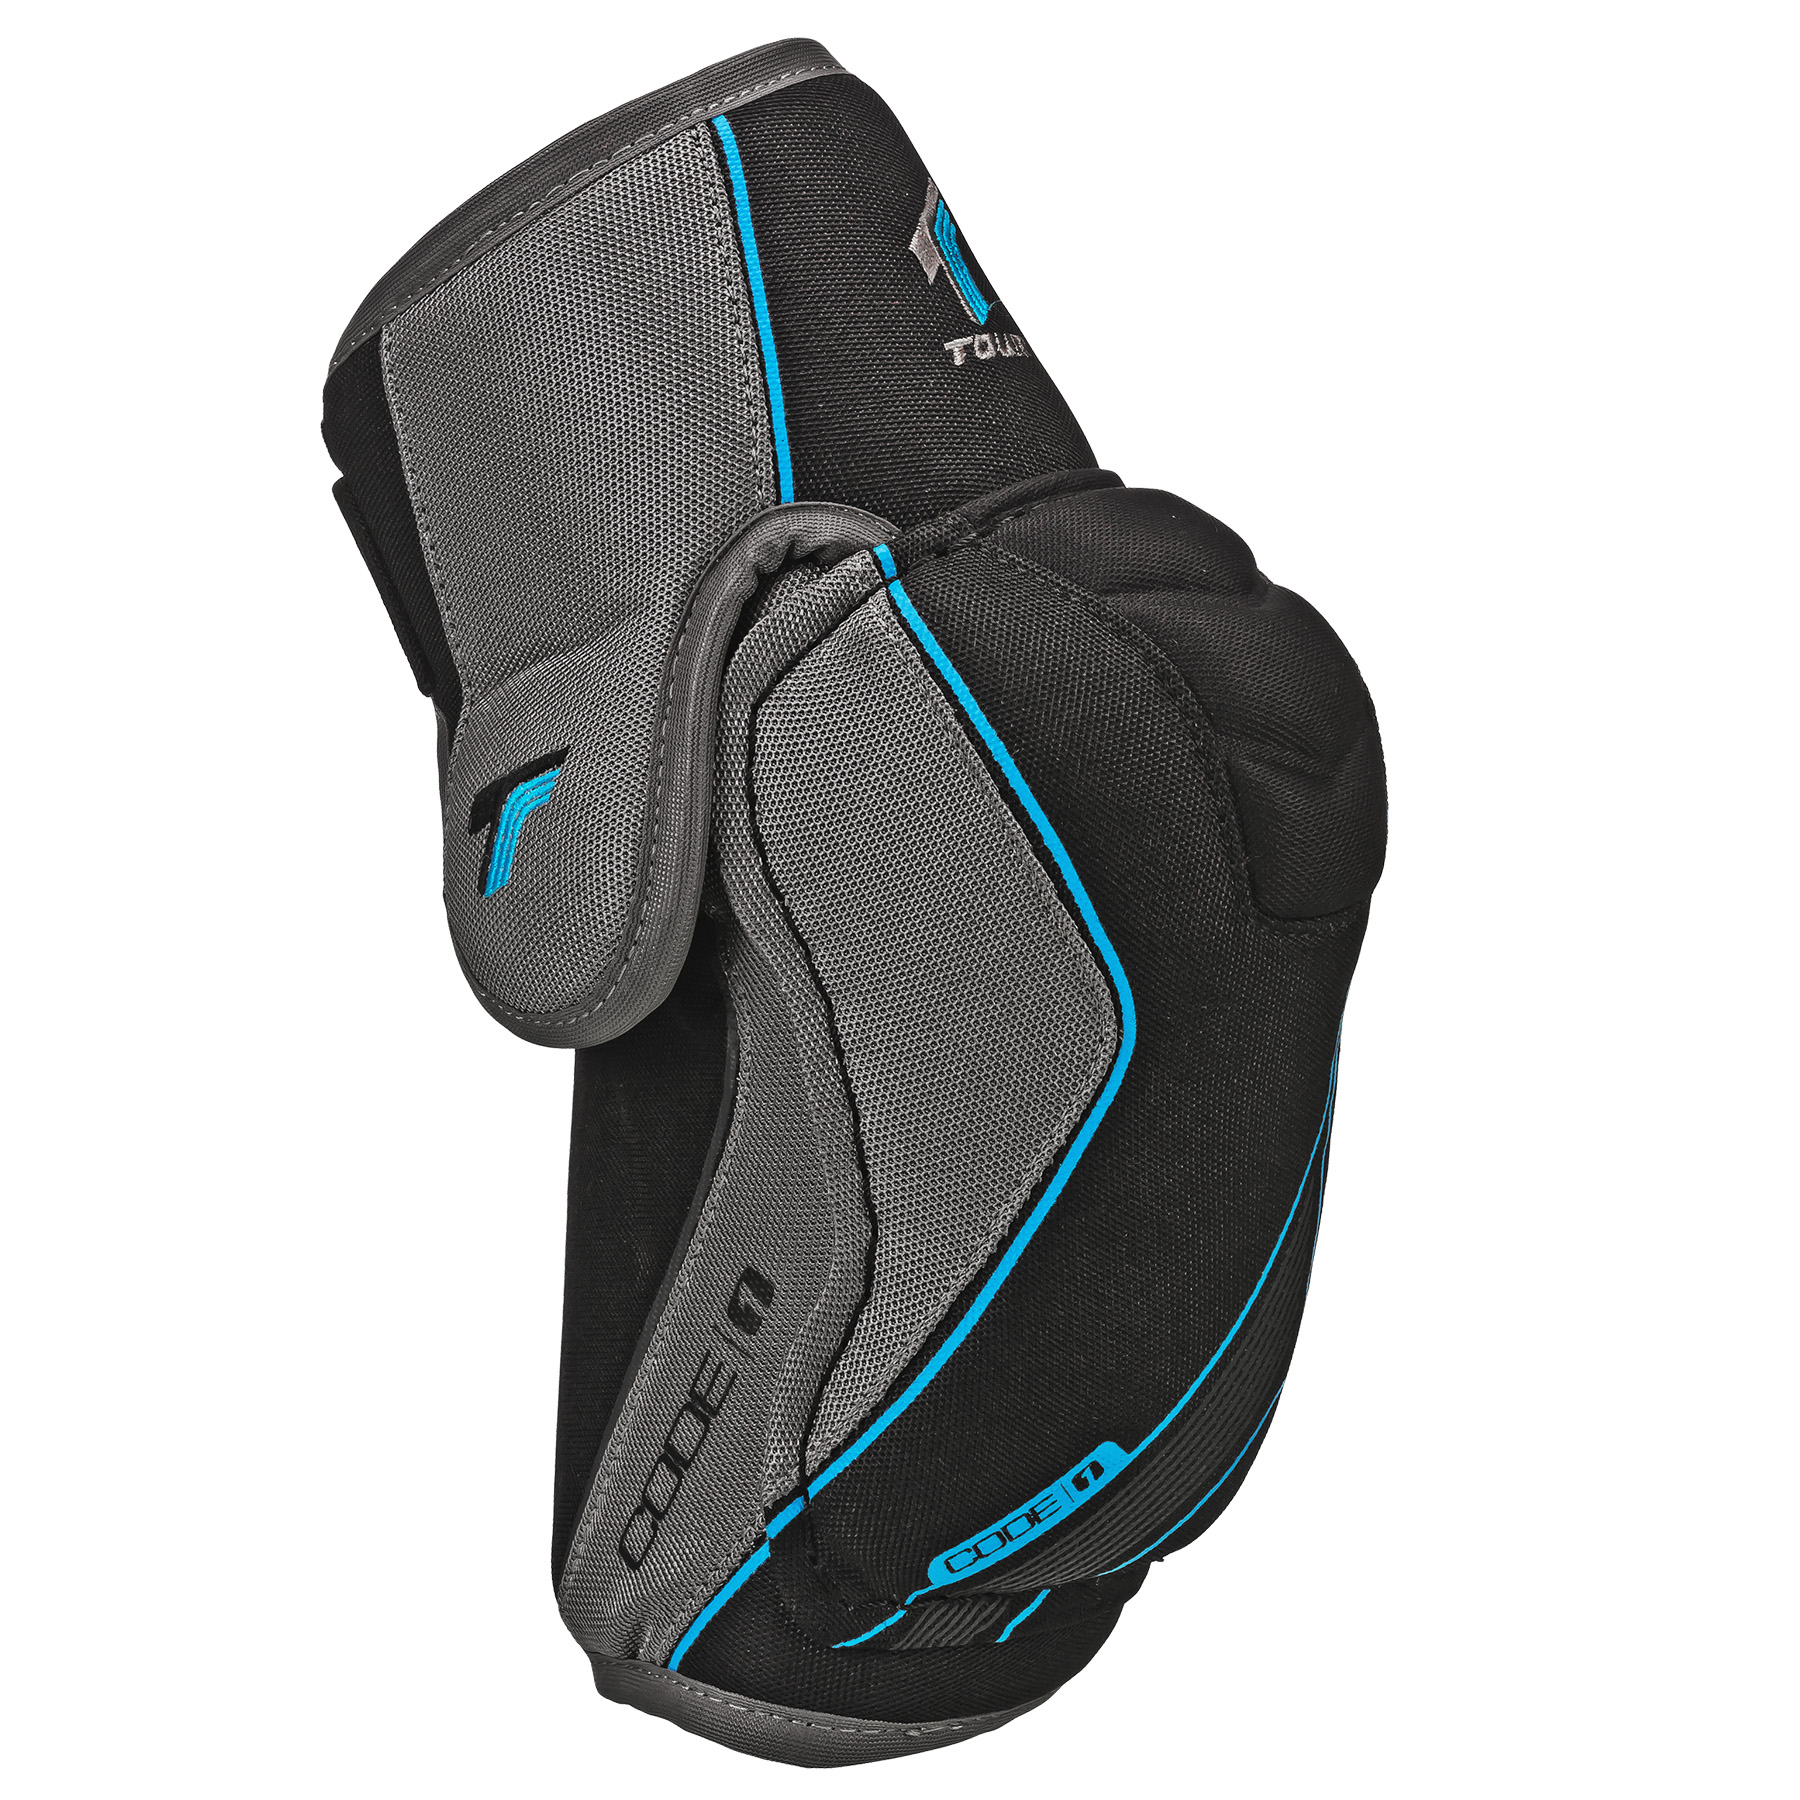 
CODE 1 ELBOW PAD ADULT